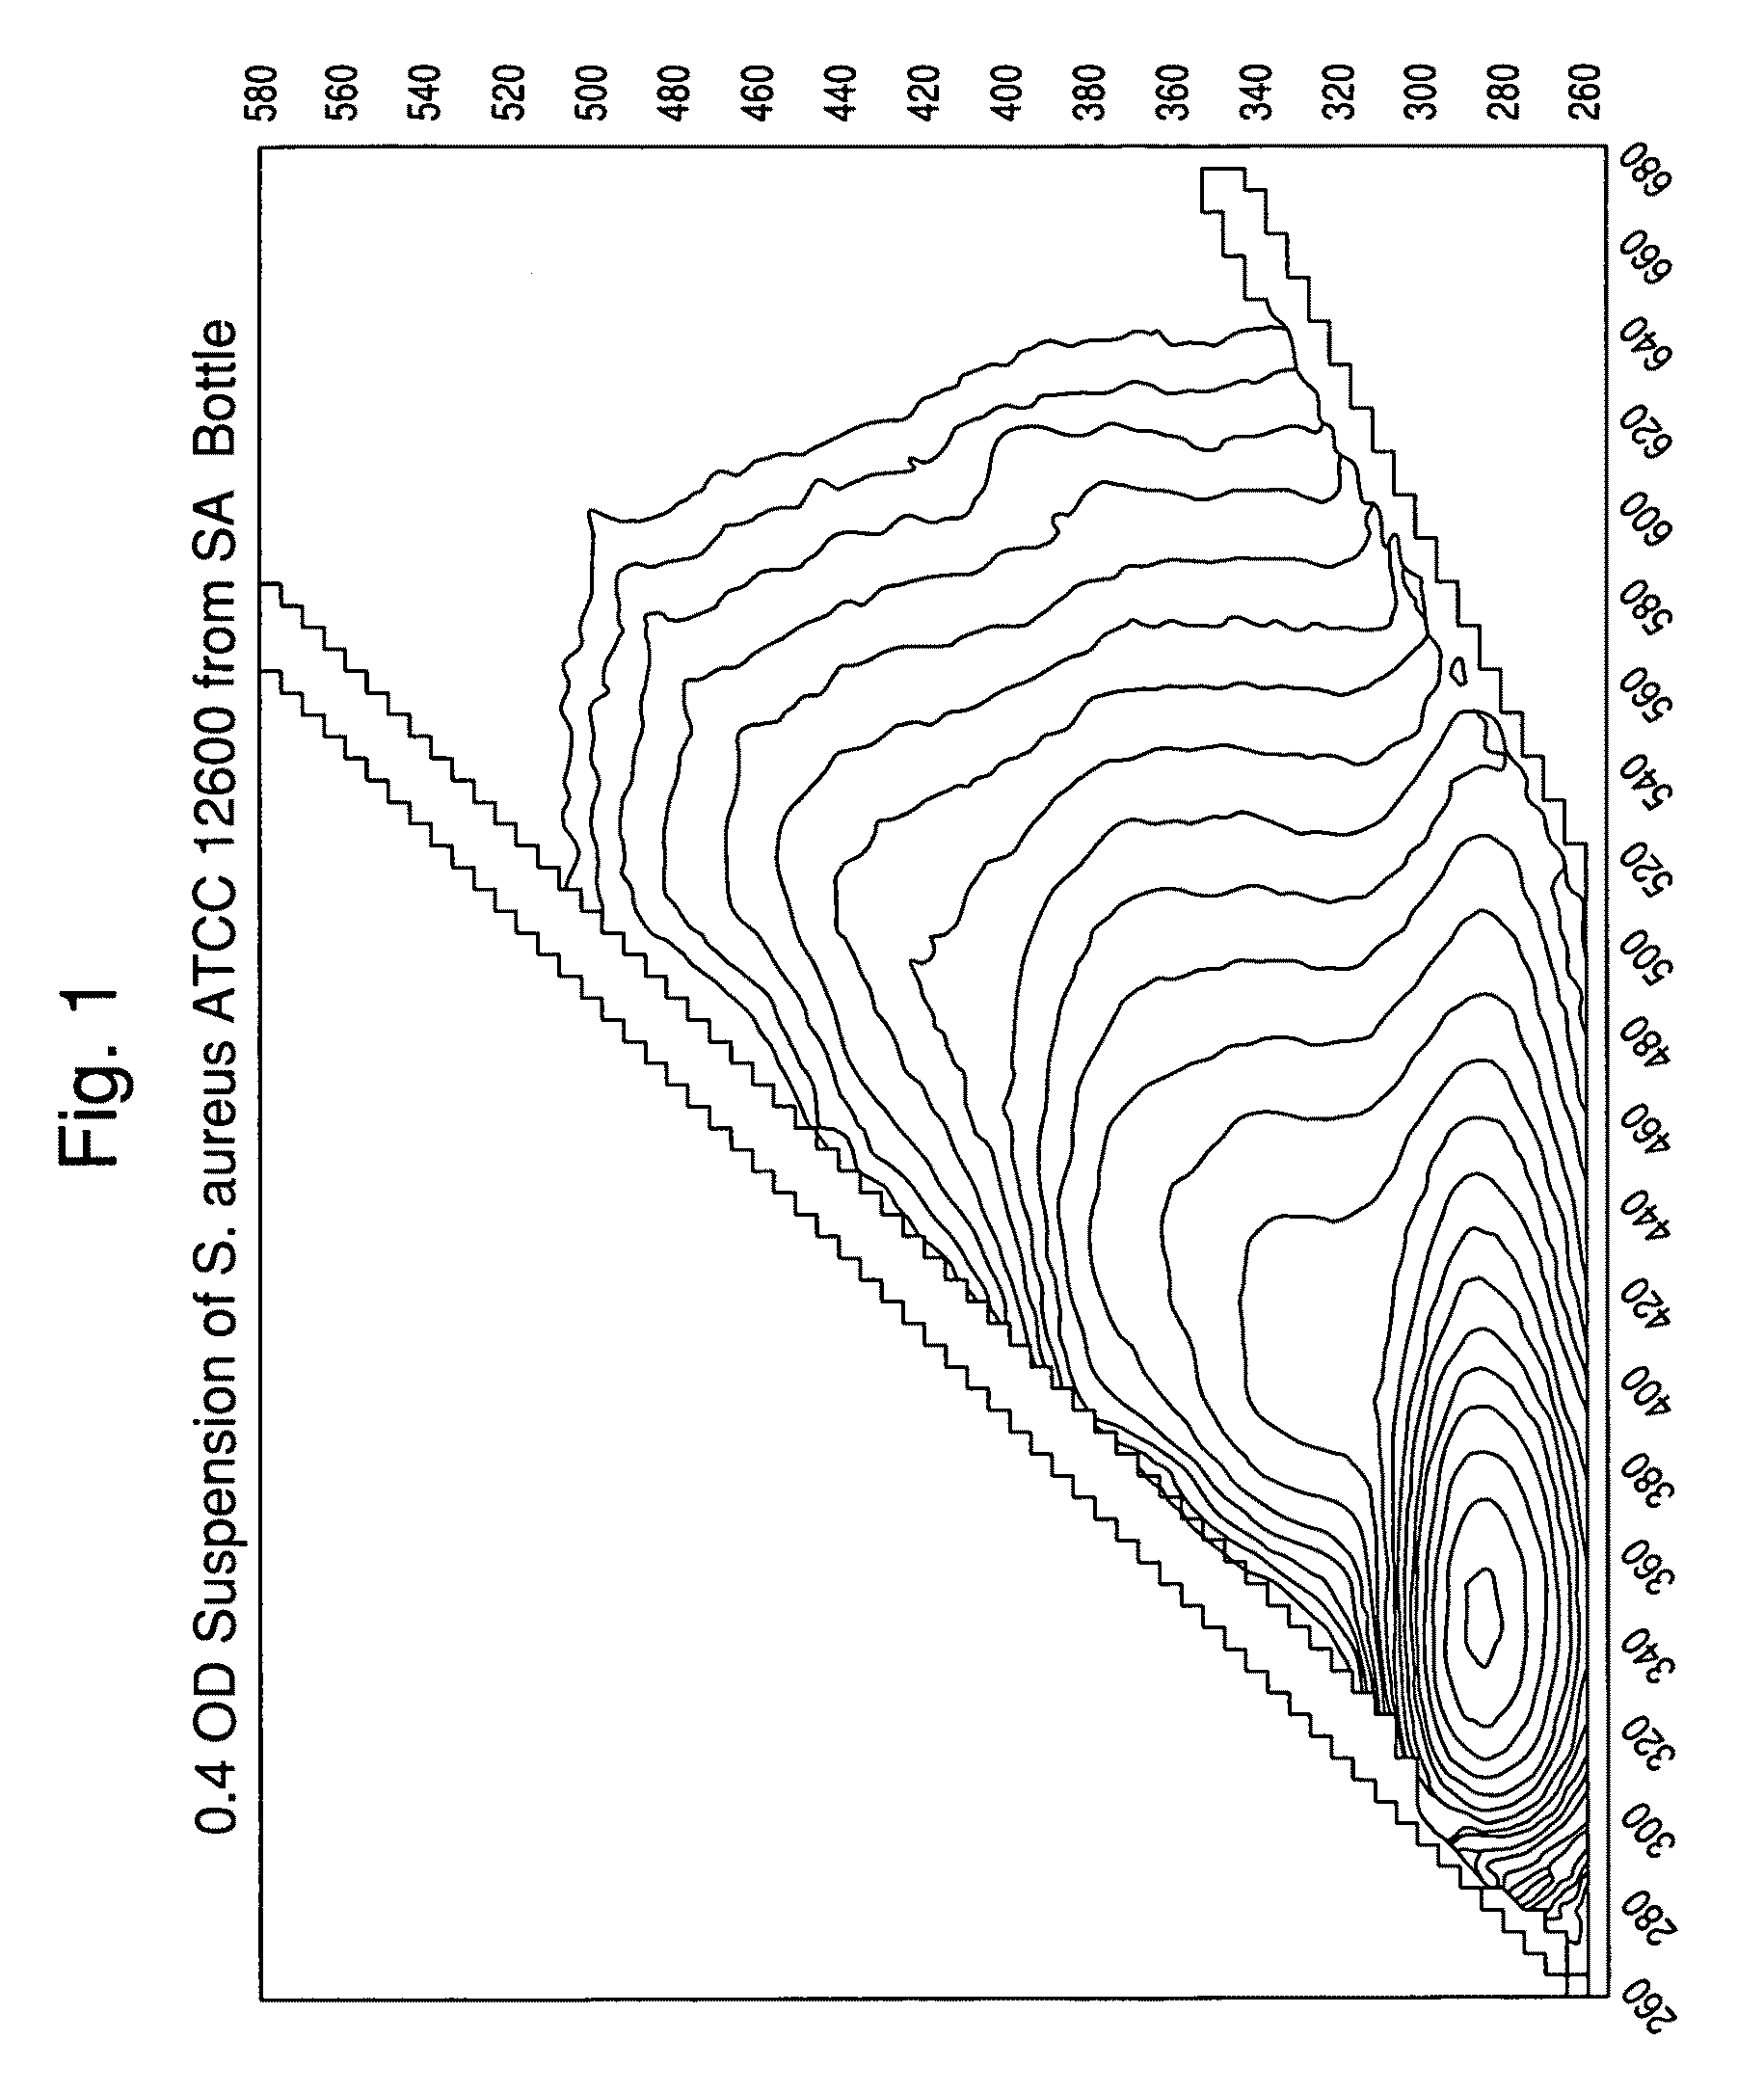 Method for separation and characterization of microorganisms using identifier agents